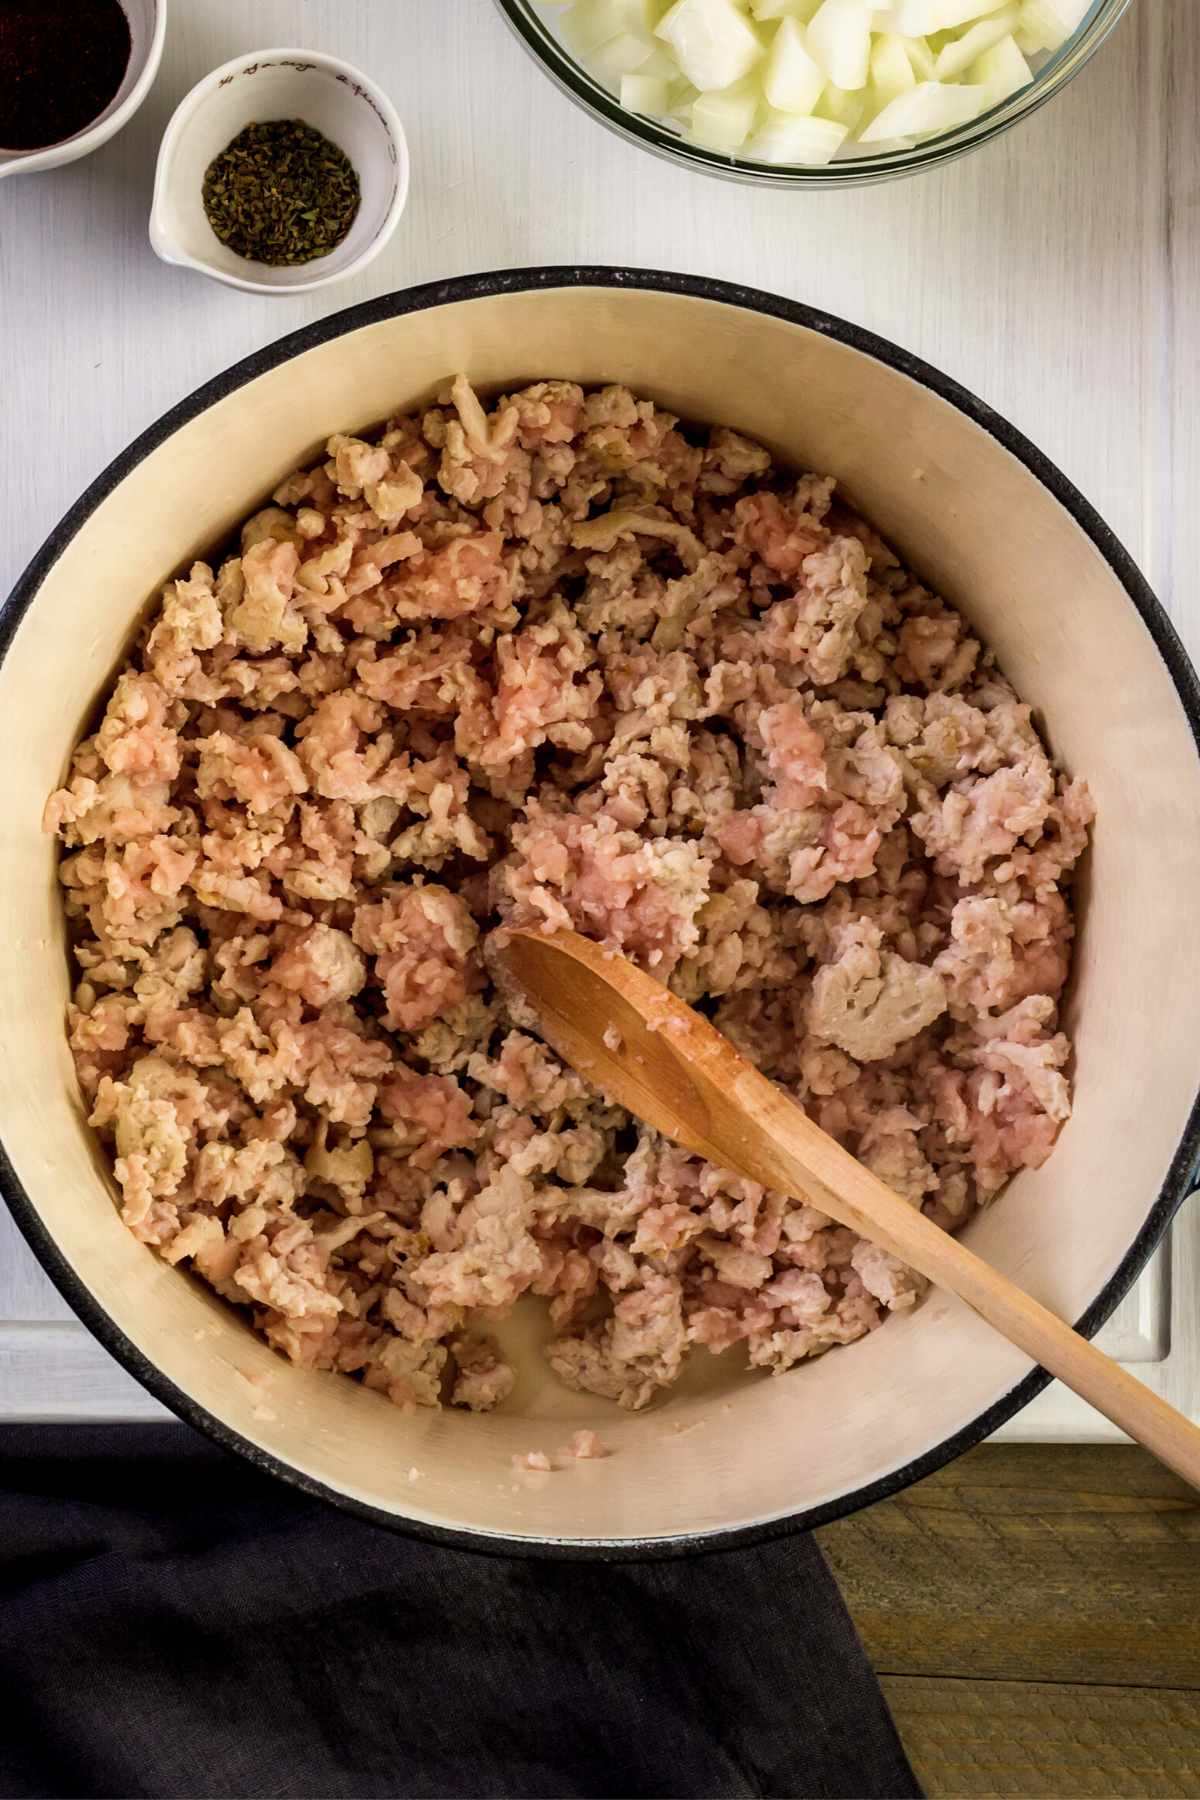 When you’re cooking ground turkey at home, the internal temp is the best way to know when it’s ready to eat. Keep reading to learn everything you need to know about measuring ground turkey internal temp.